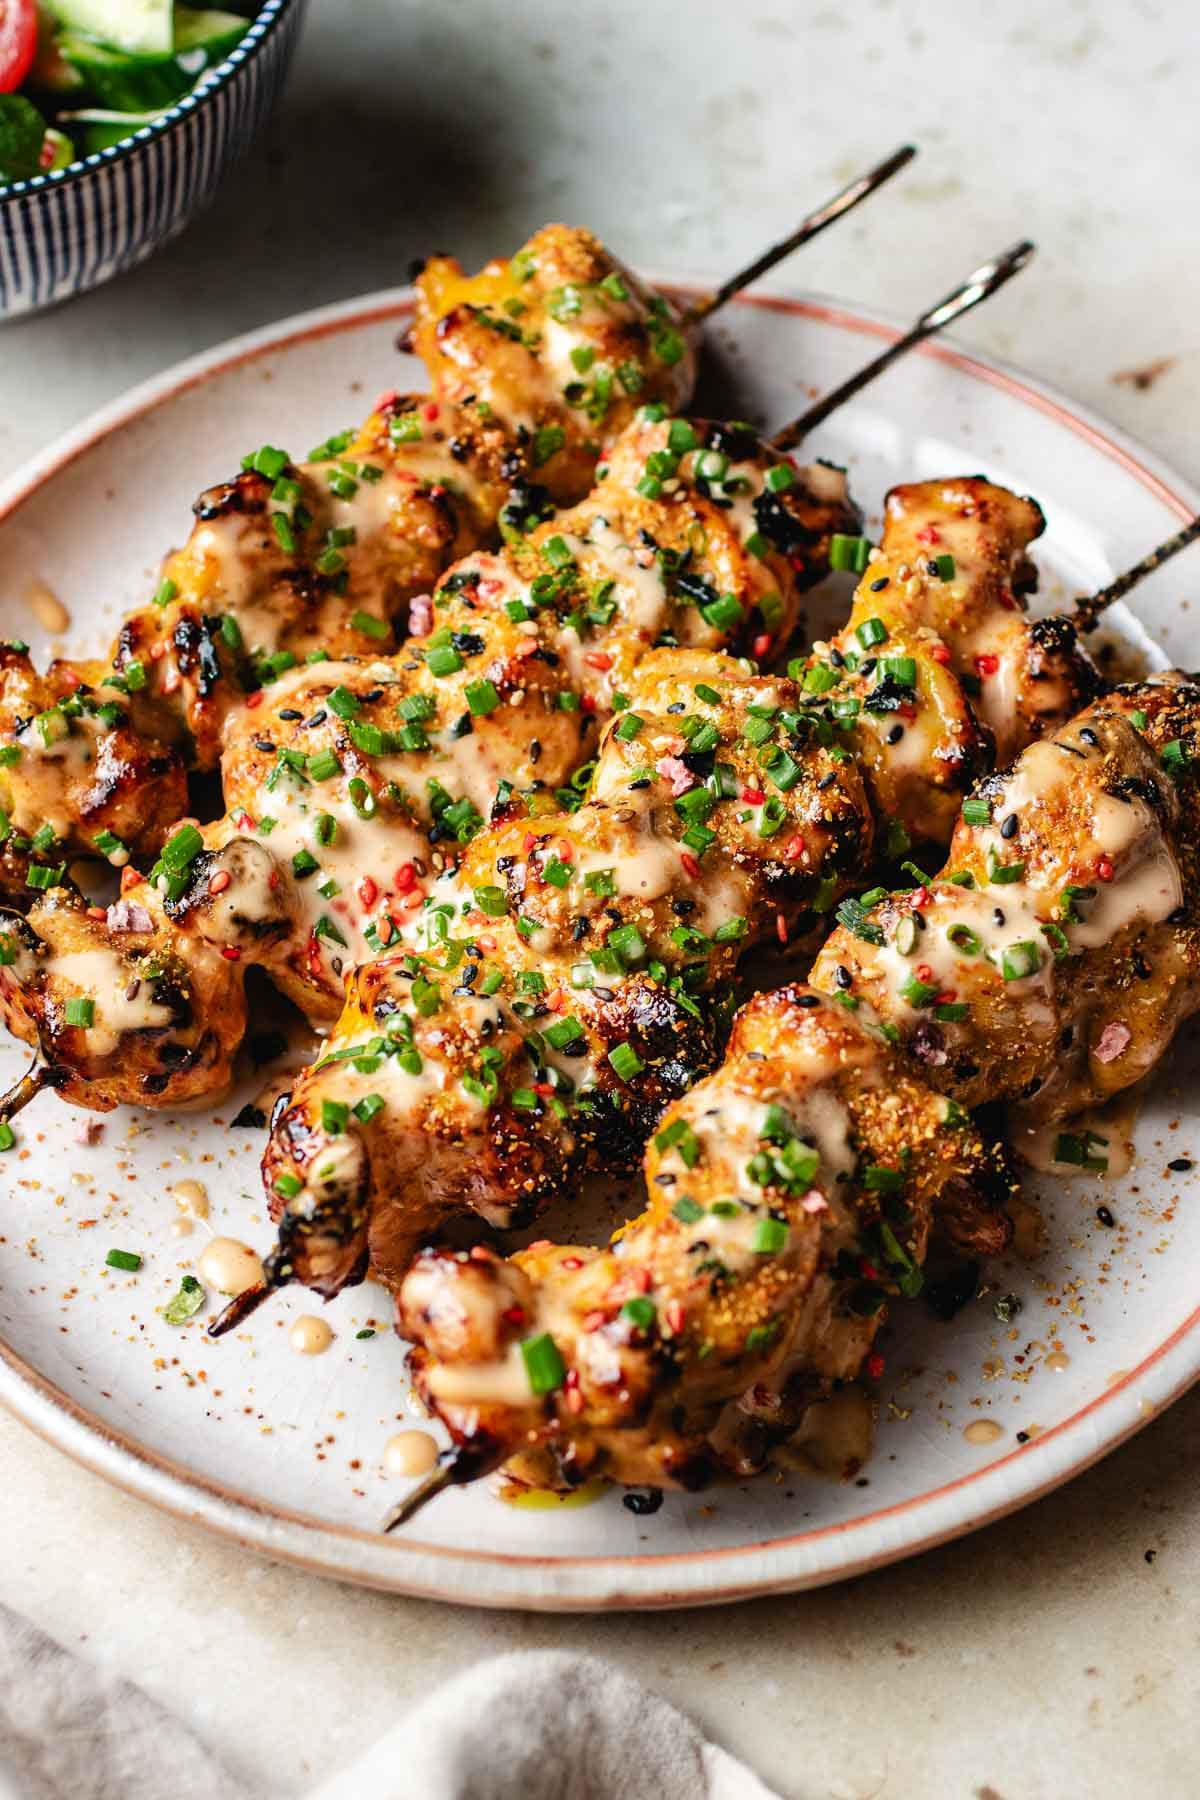 A side close shot shows bang bang chicken skewers brushed with sauce and garnish on top.